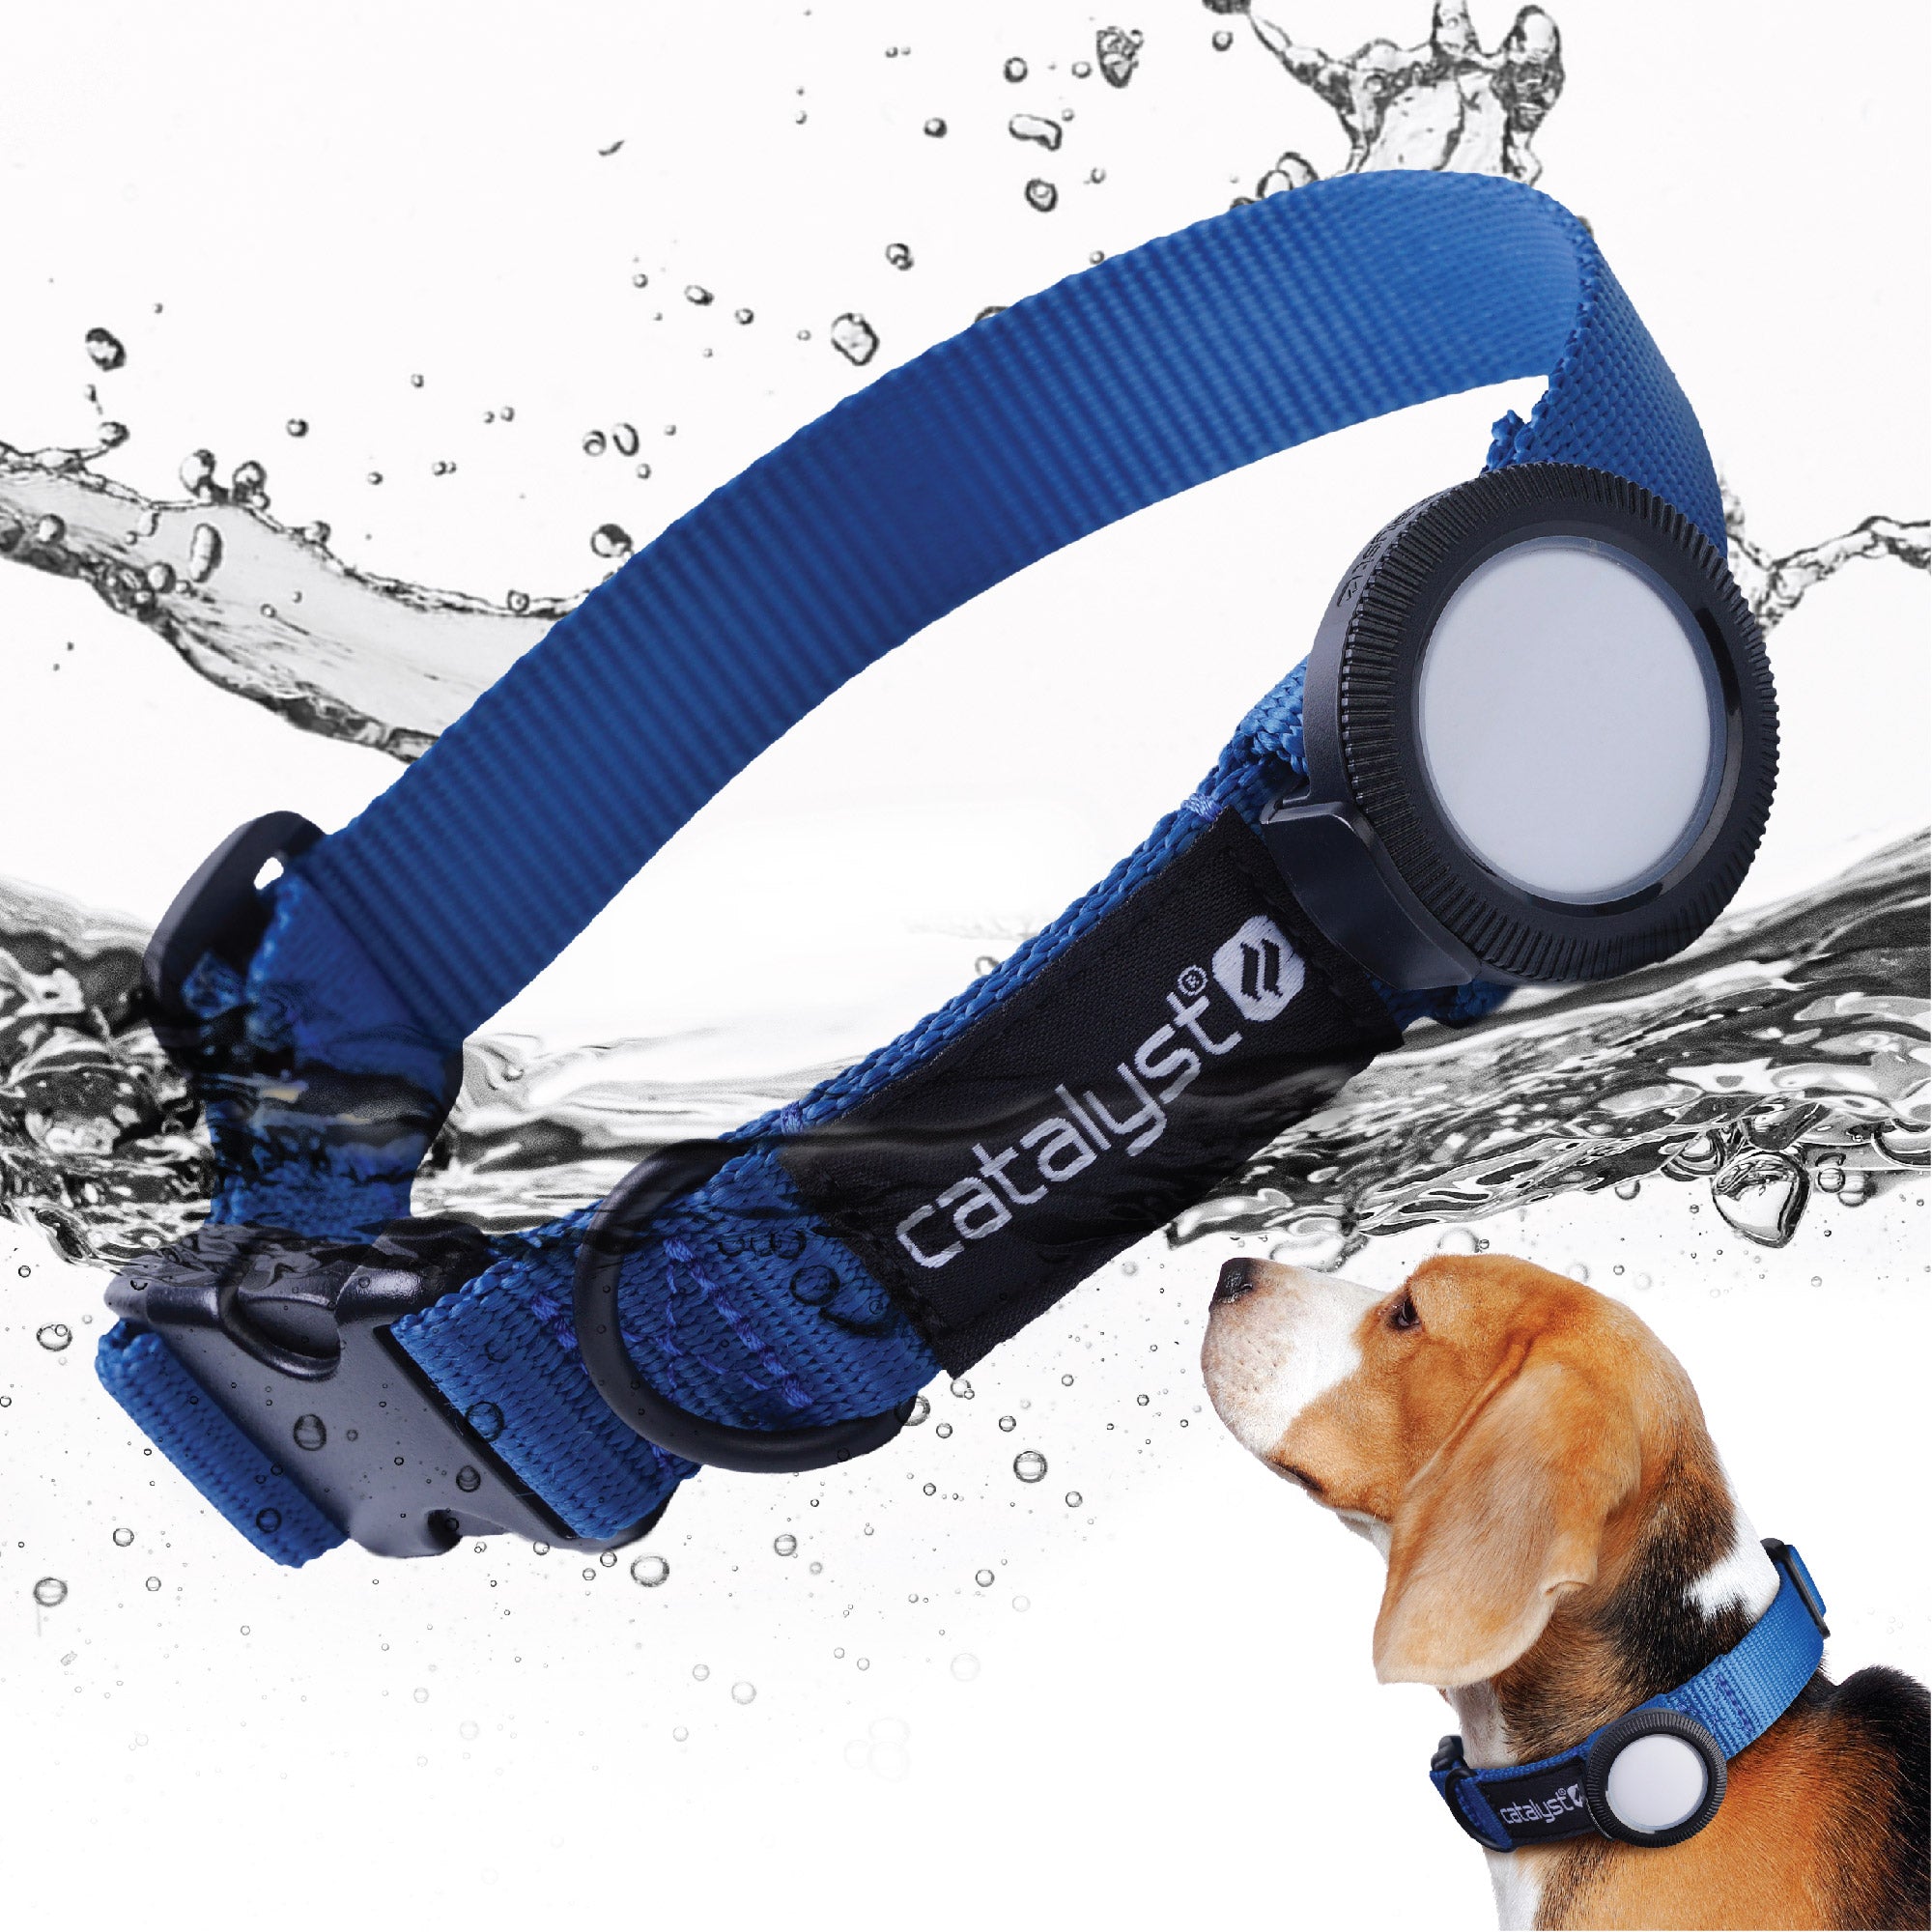 Quick Drying 1" Dog Collar with Waterproof AirTag Case